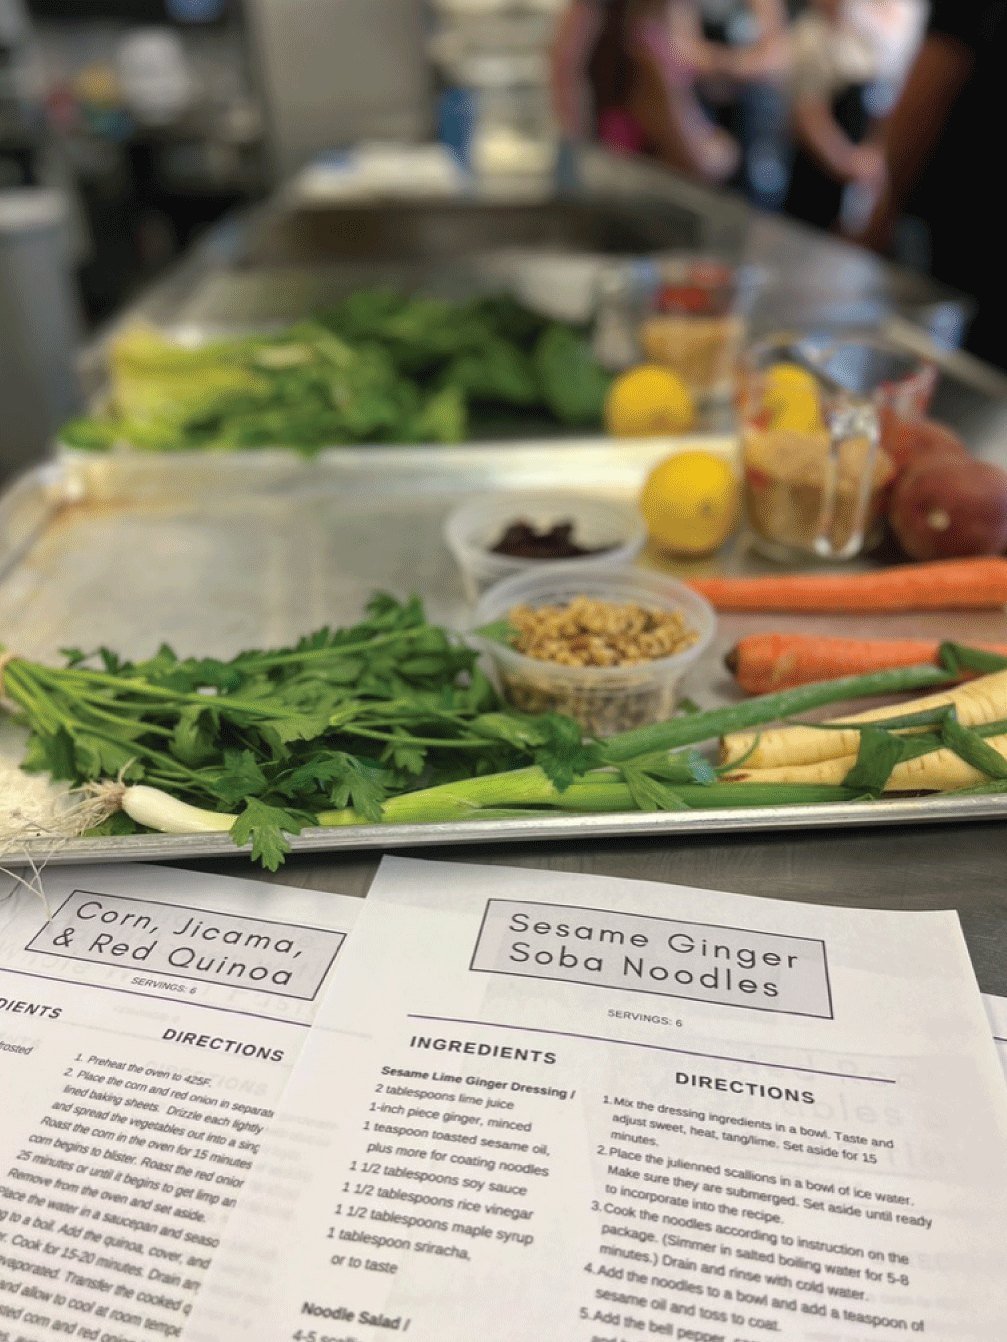 A tray of vegetables next to a paper recipe for sesame ginger soba noodles.